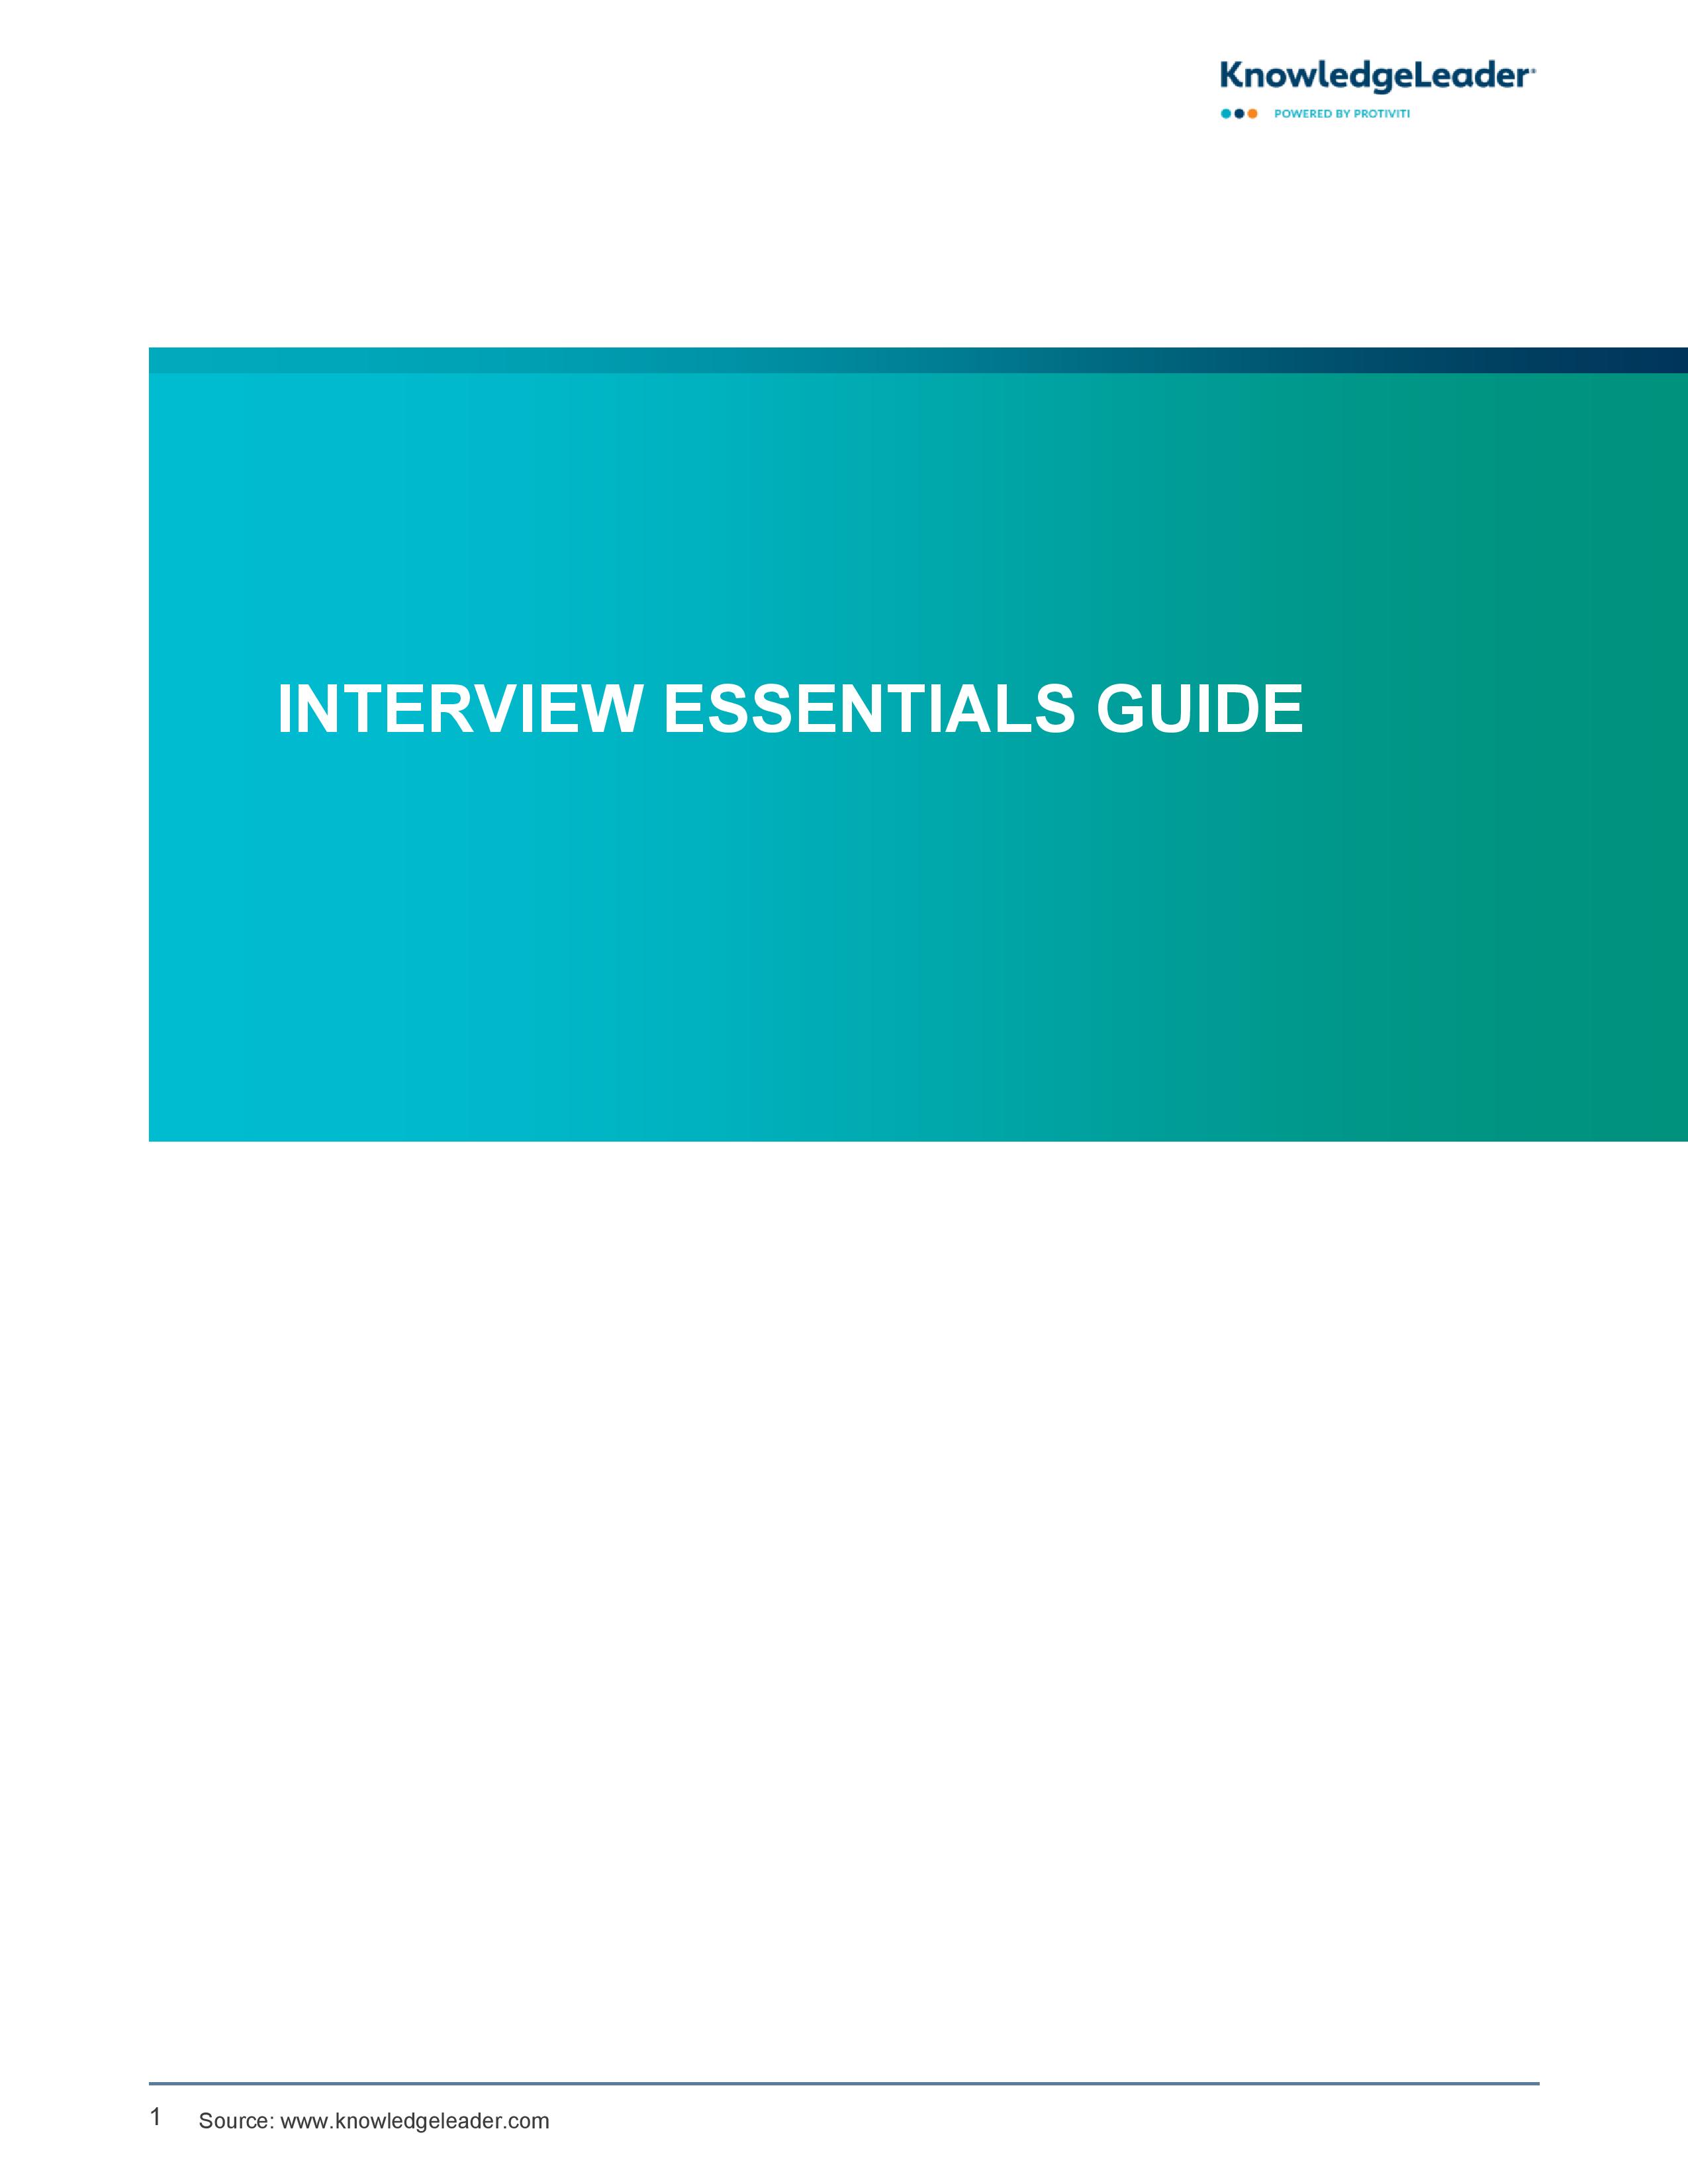 Screenshot of the first page of Interview Essentials Guide